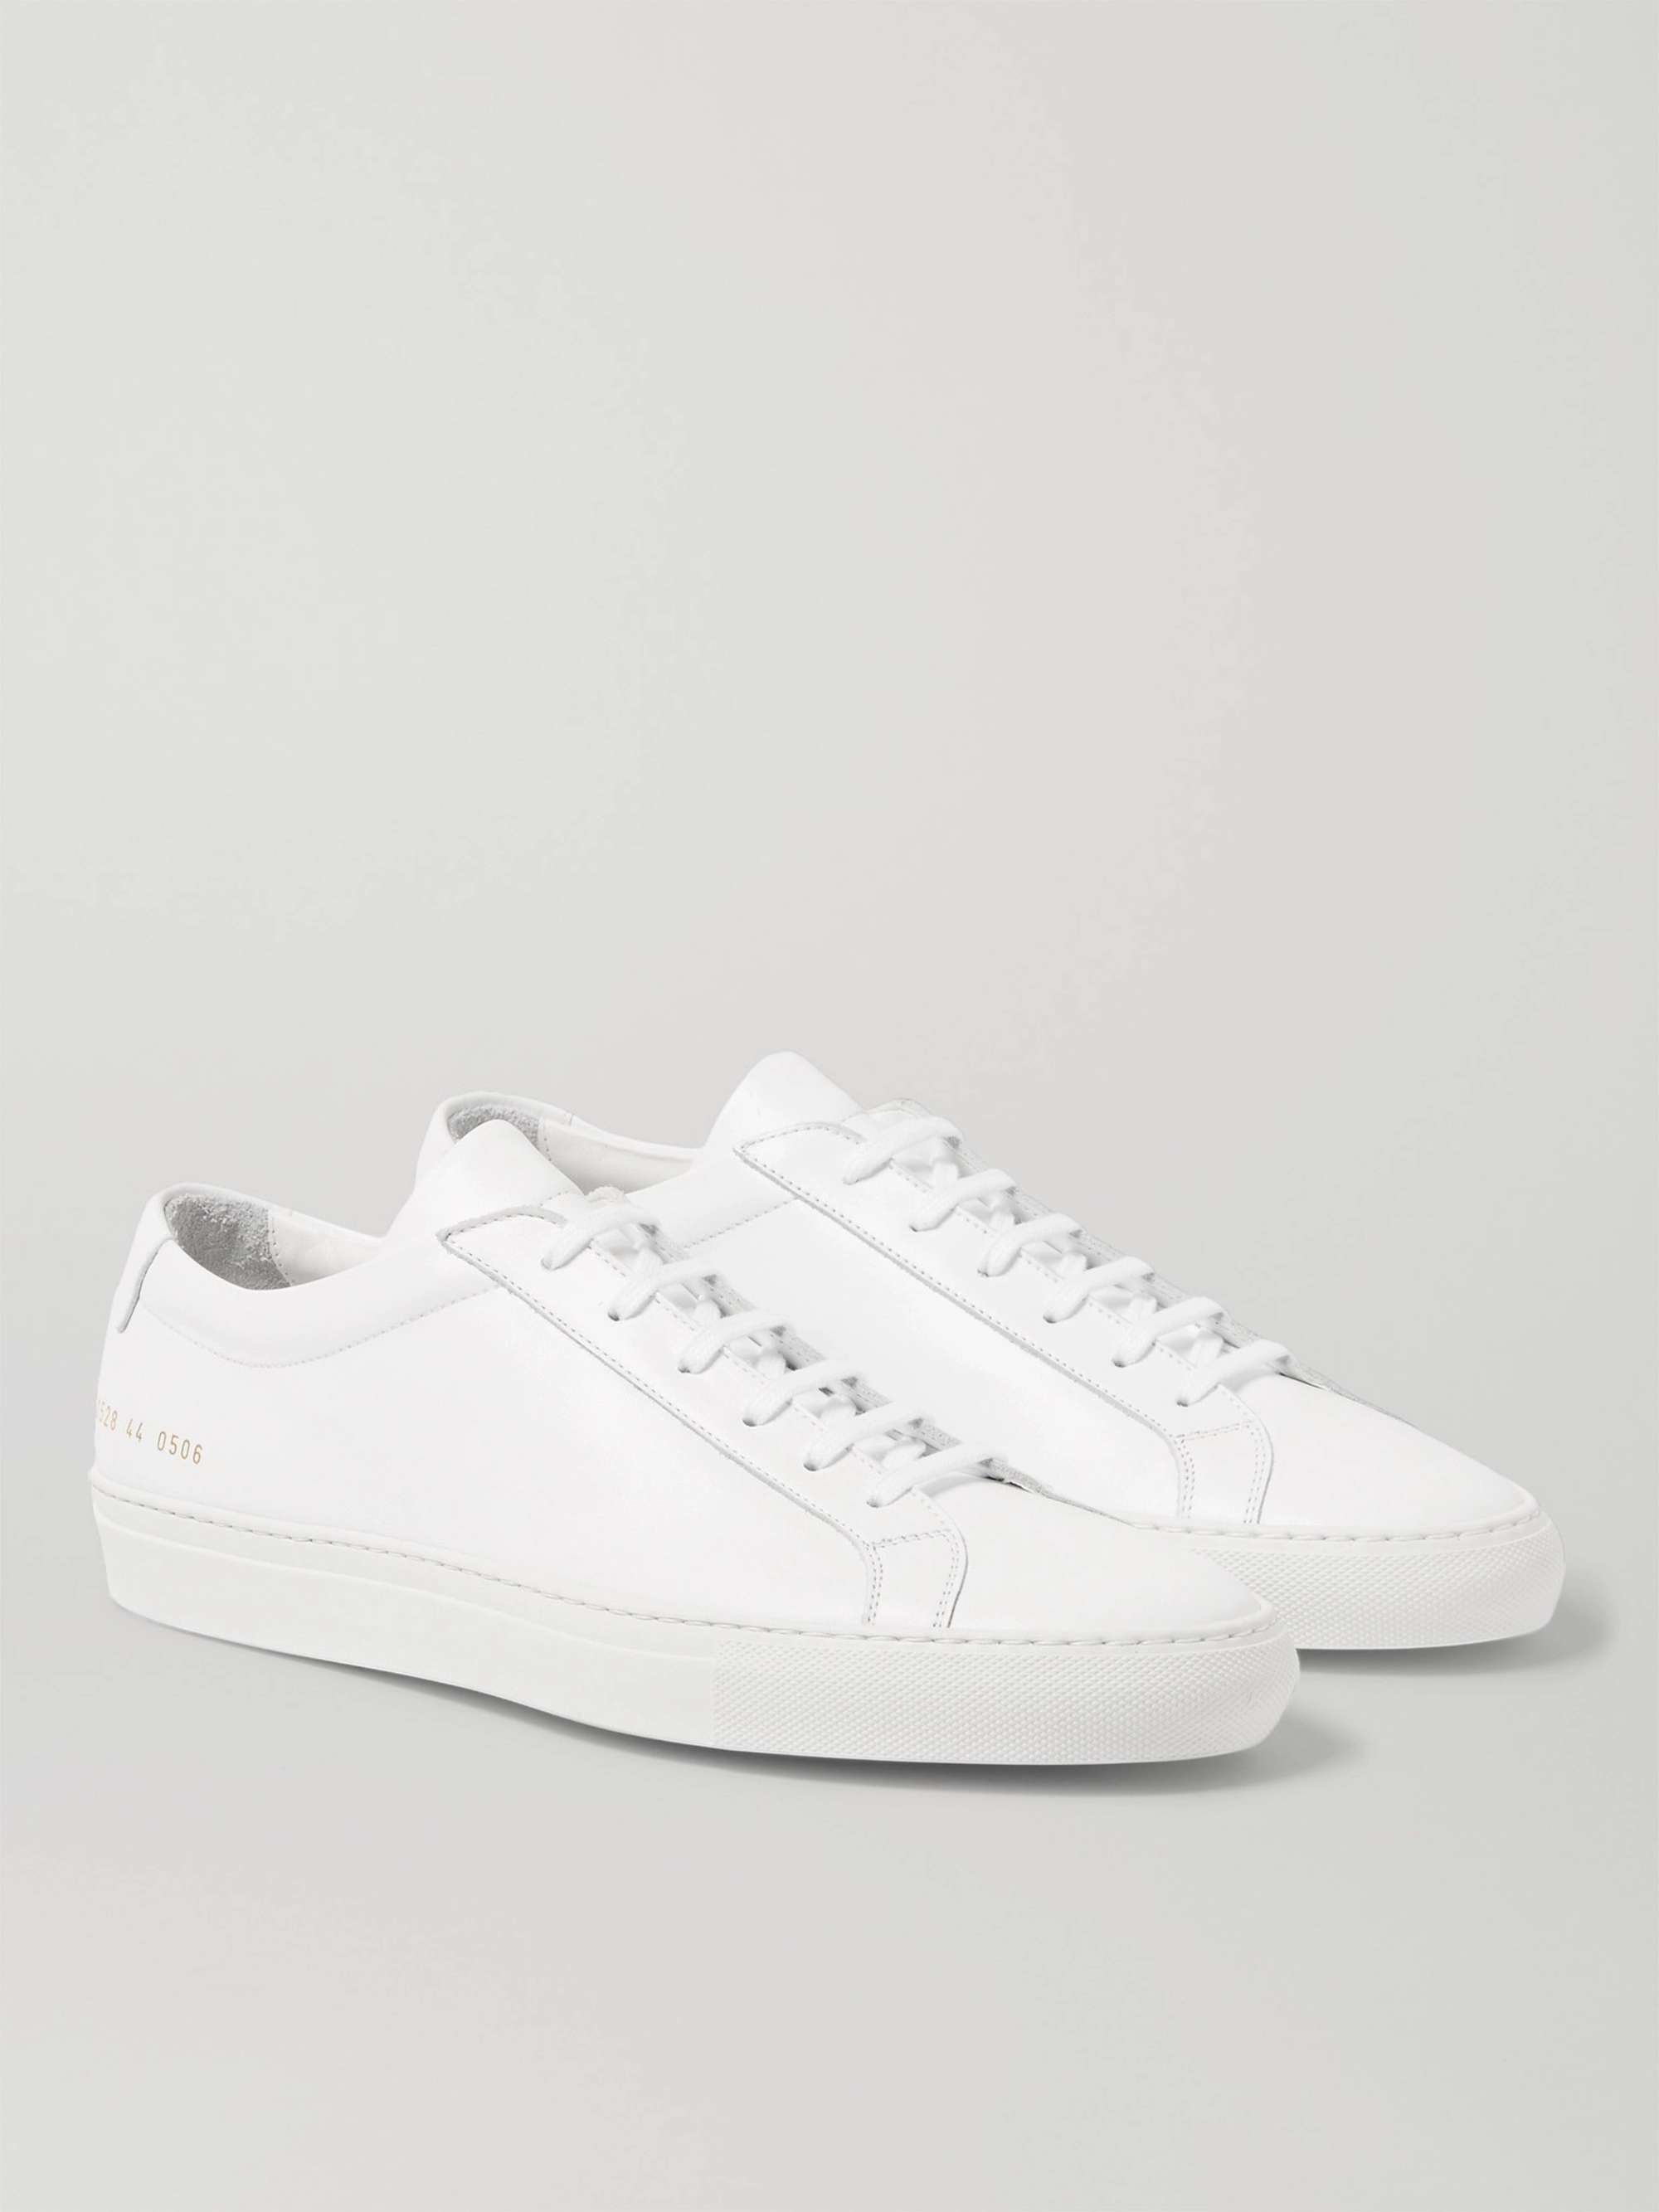 Welsprekend Automatisch Resistent COMMON PROJECTS Original Achilles Leather Sneakers | MR PORTER